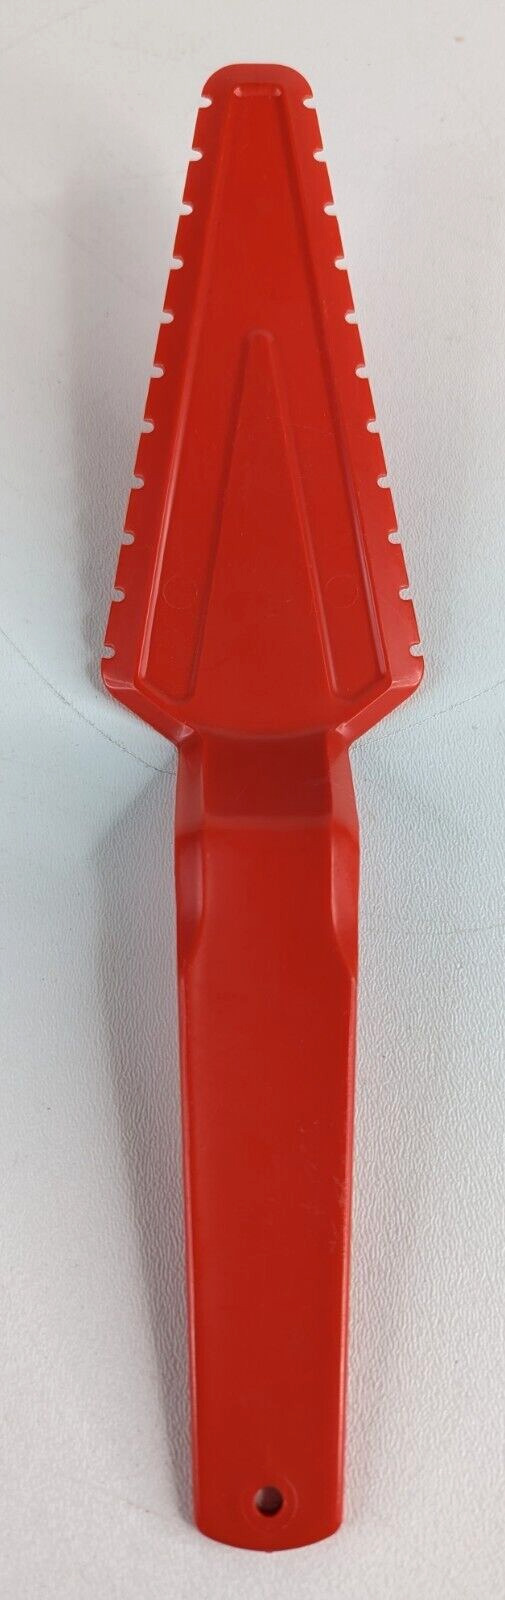 Vintage Tupperware RED Cut and Serve Serrated Pie/Cake Cutter Server 1228-8